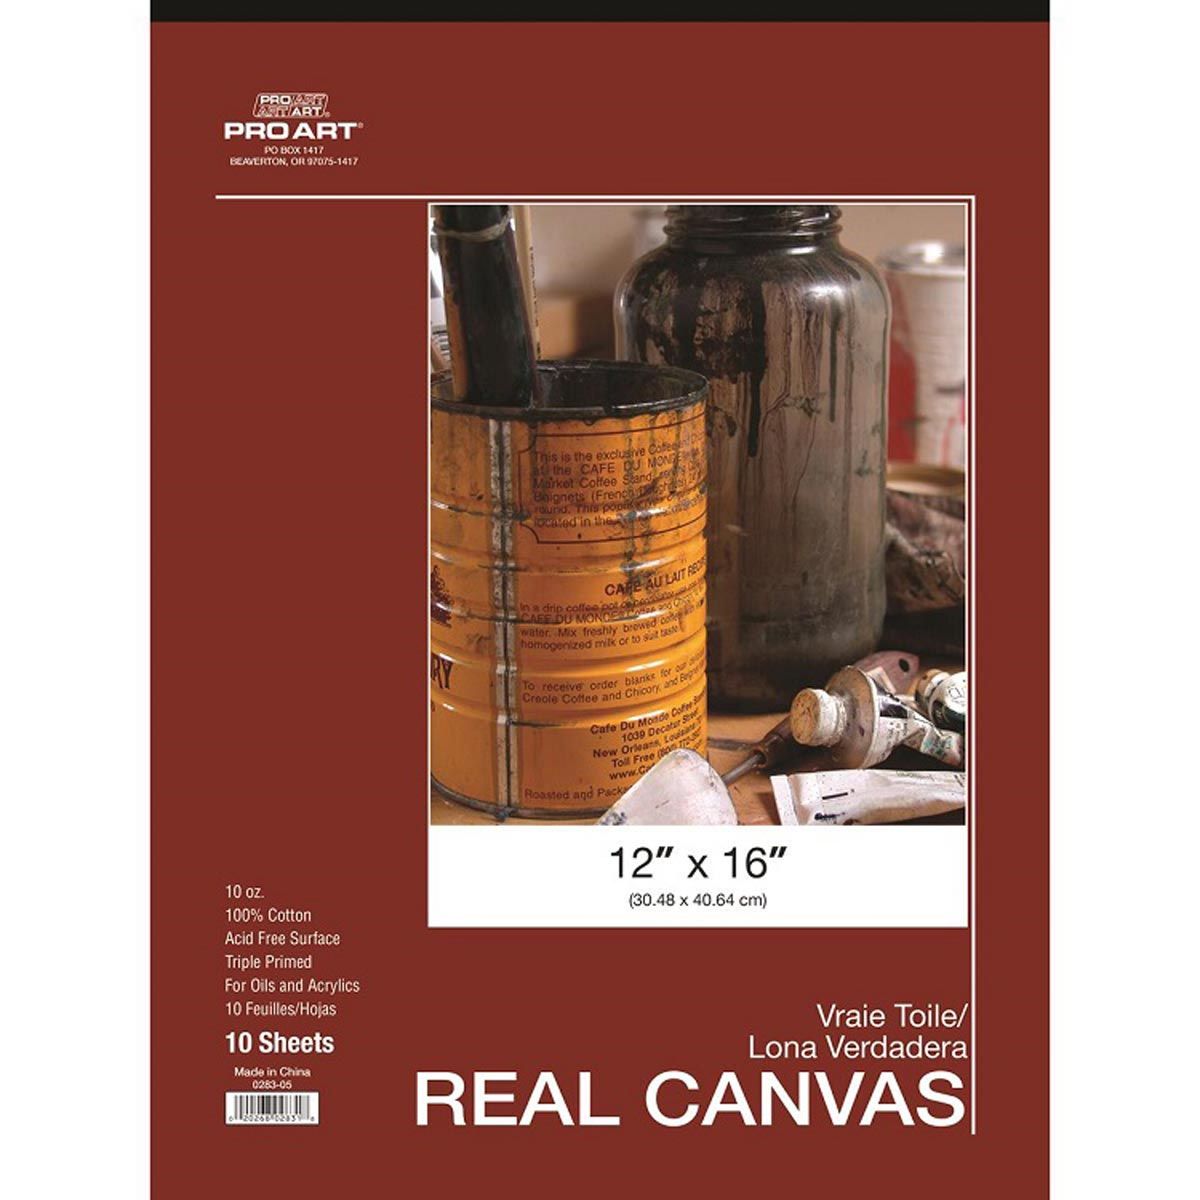 Pro Art Real Canvas 10 Sheet Pad - 12 x 16-inches